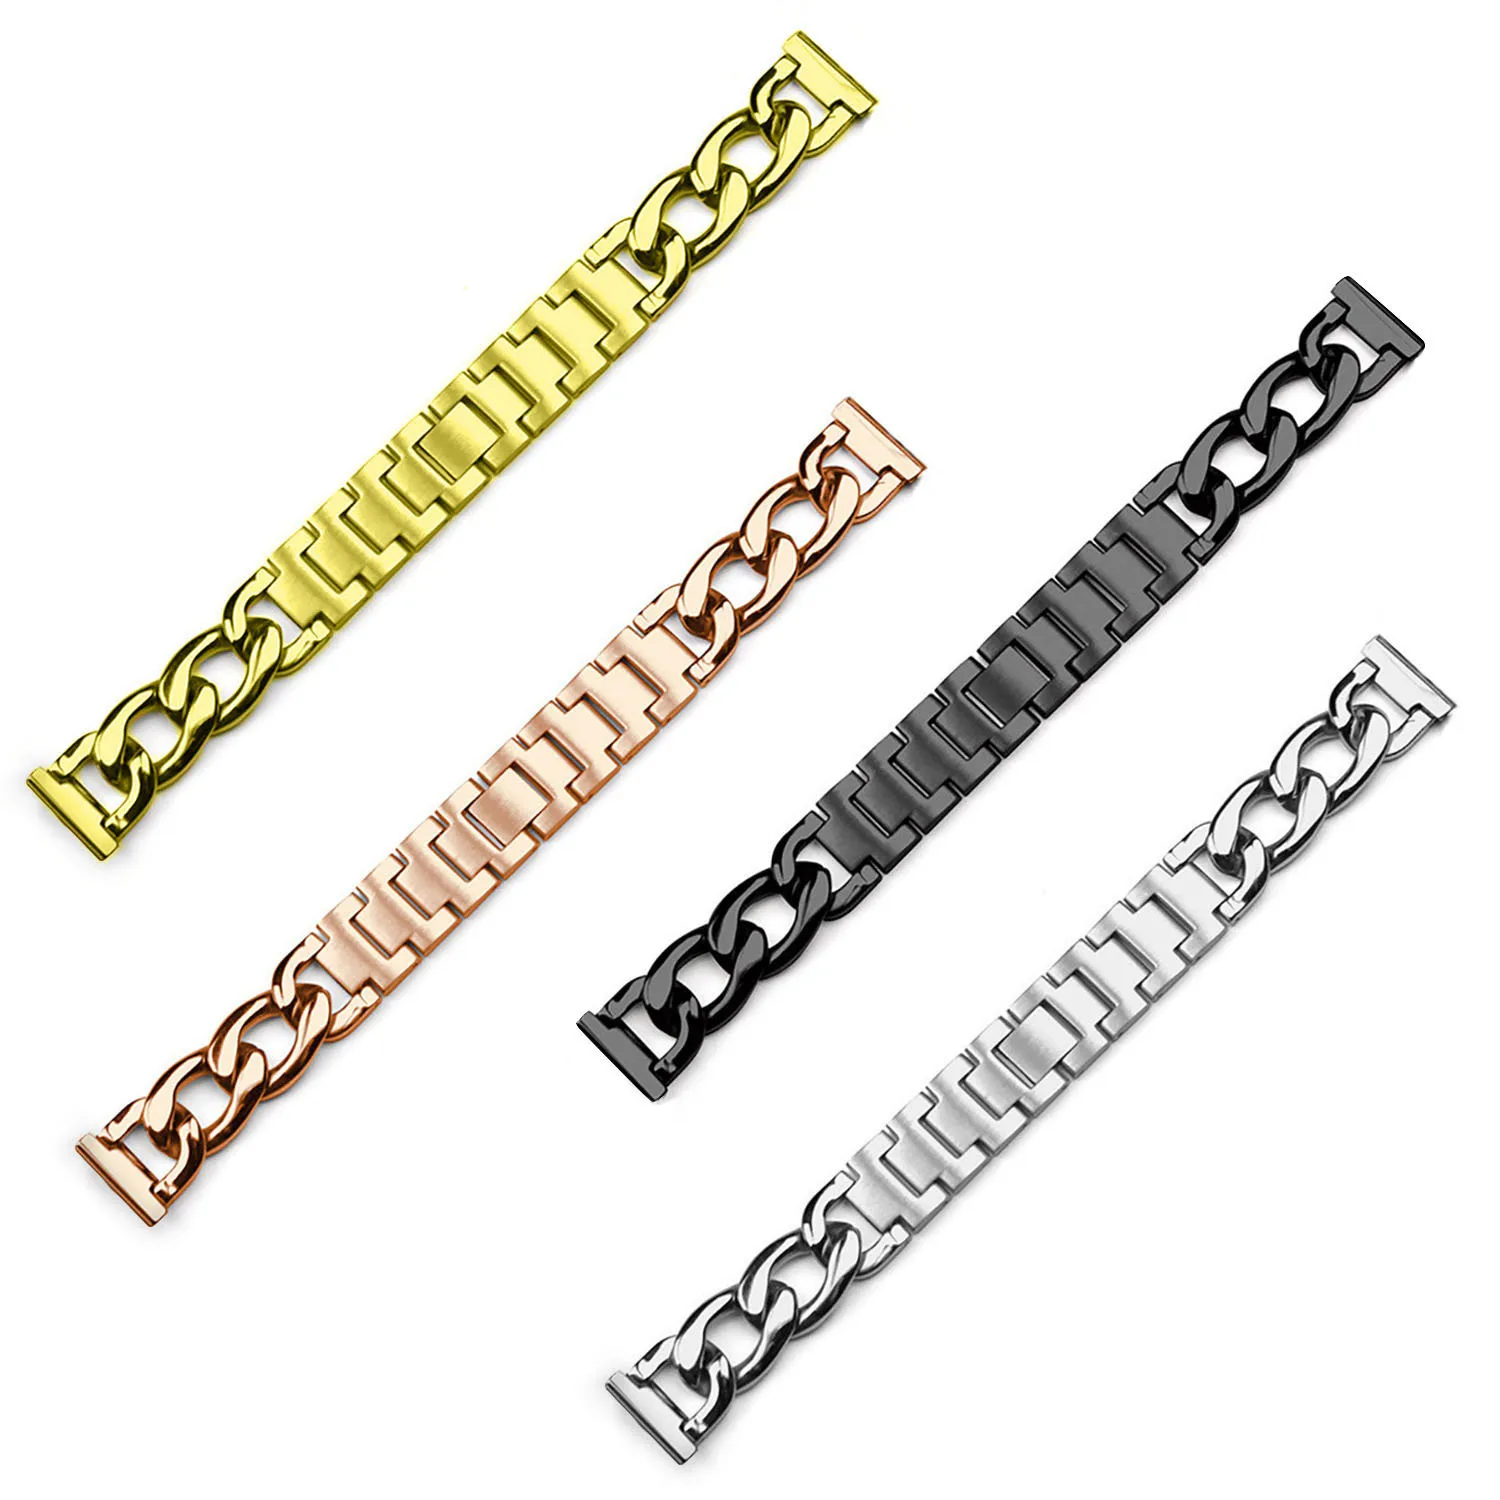 20mm 22mm Stainless Steel Chain Strap for Samsung Galaxy Watch Active 2 3 4 Gear S2 Bracelet Huawei Band GT 2e 3 Pro Amazfit Bip images - 6